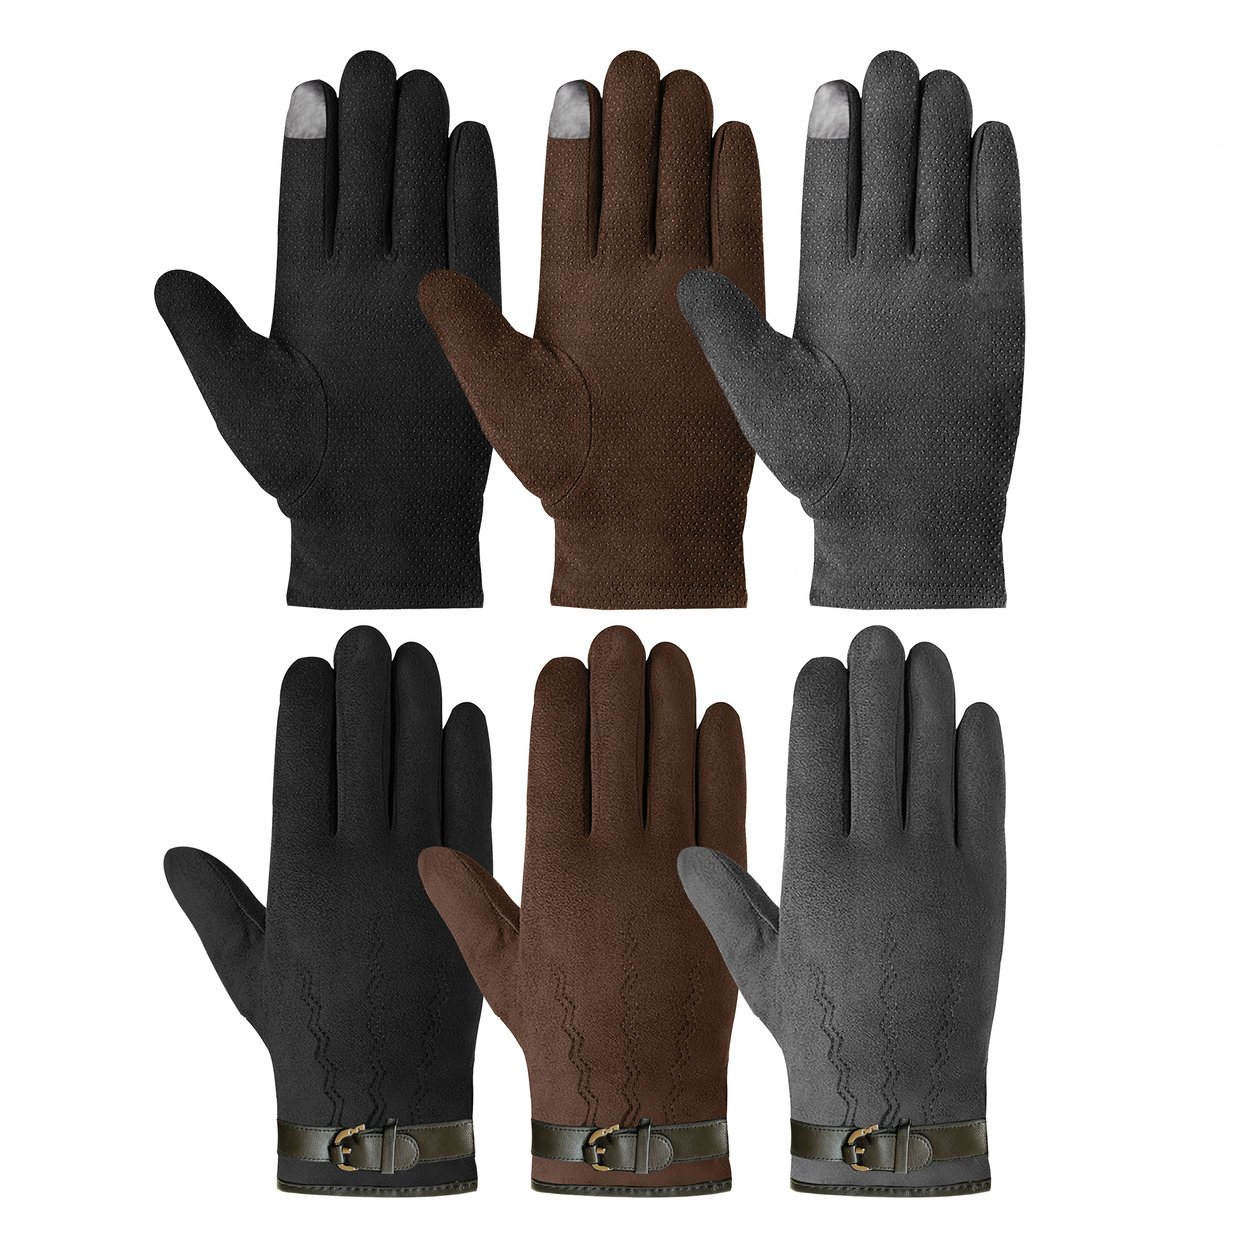 Winter Warm Soft Lining Weather Proof Touchscreen Suede Insulated Gloves - Grey